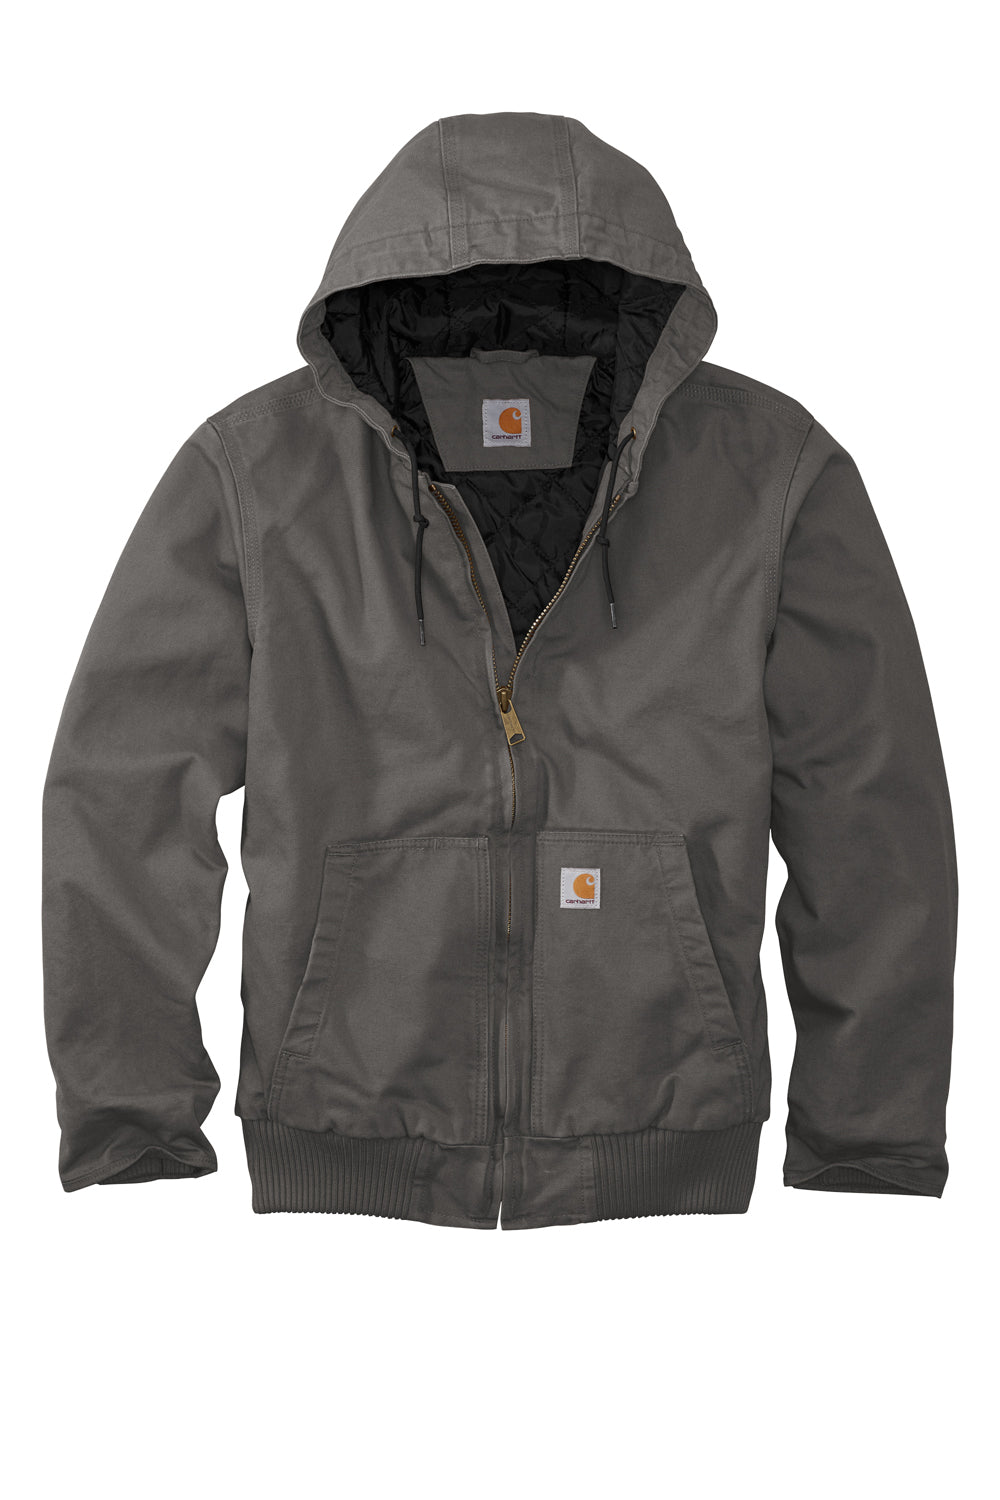 Carhartt CT104050/CTT104050 Mens Active Washed Duck Full Zip Hooded Jacket Gravel Grey Flat Front